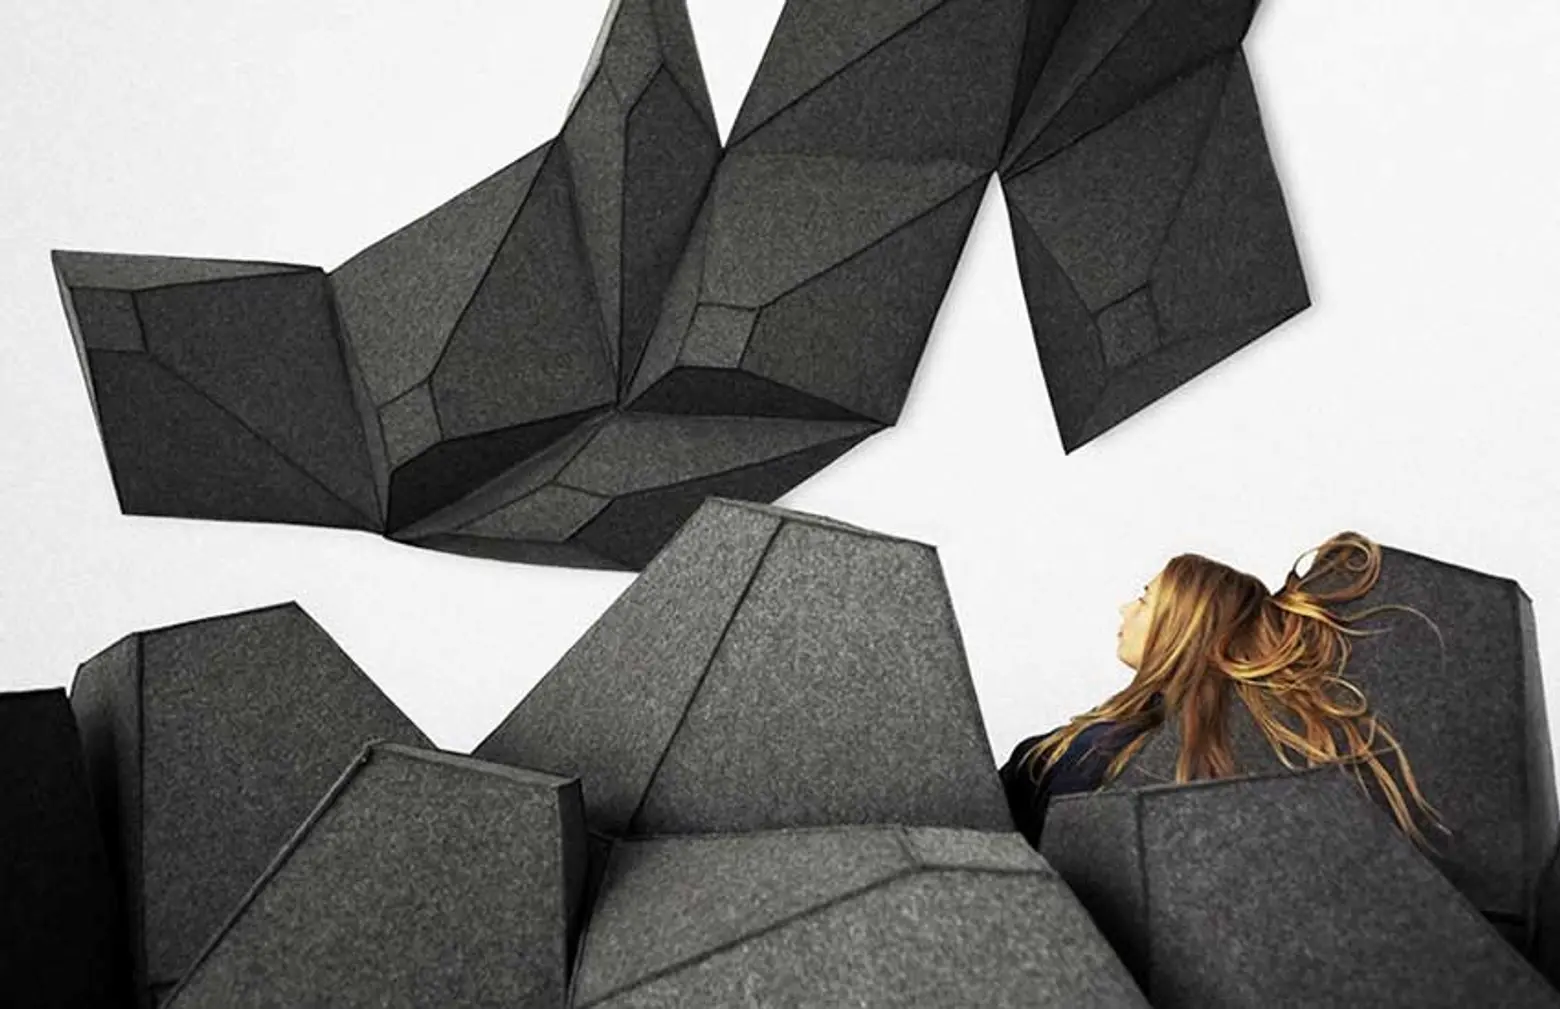 Stéphanie Marin, faceted seat, Les Angles, woolen seat, Smaring, Livingstones, oversized pebbles, acoustic properties, floor furniture, wall insulator, Roger Penrose,